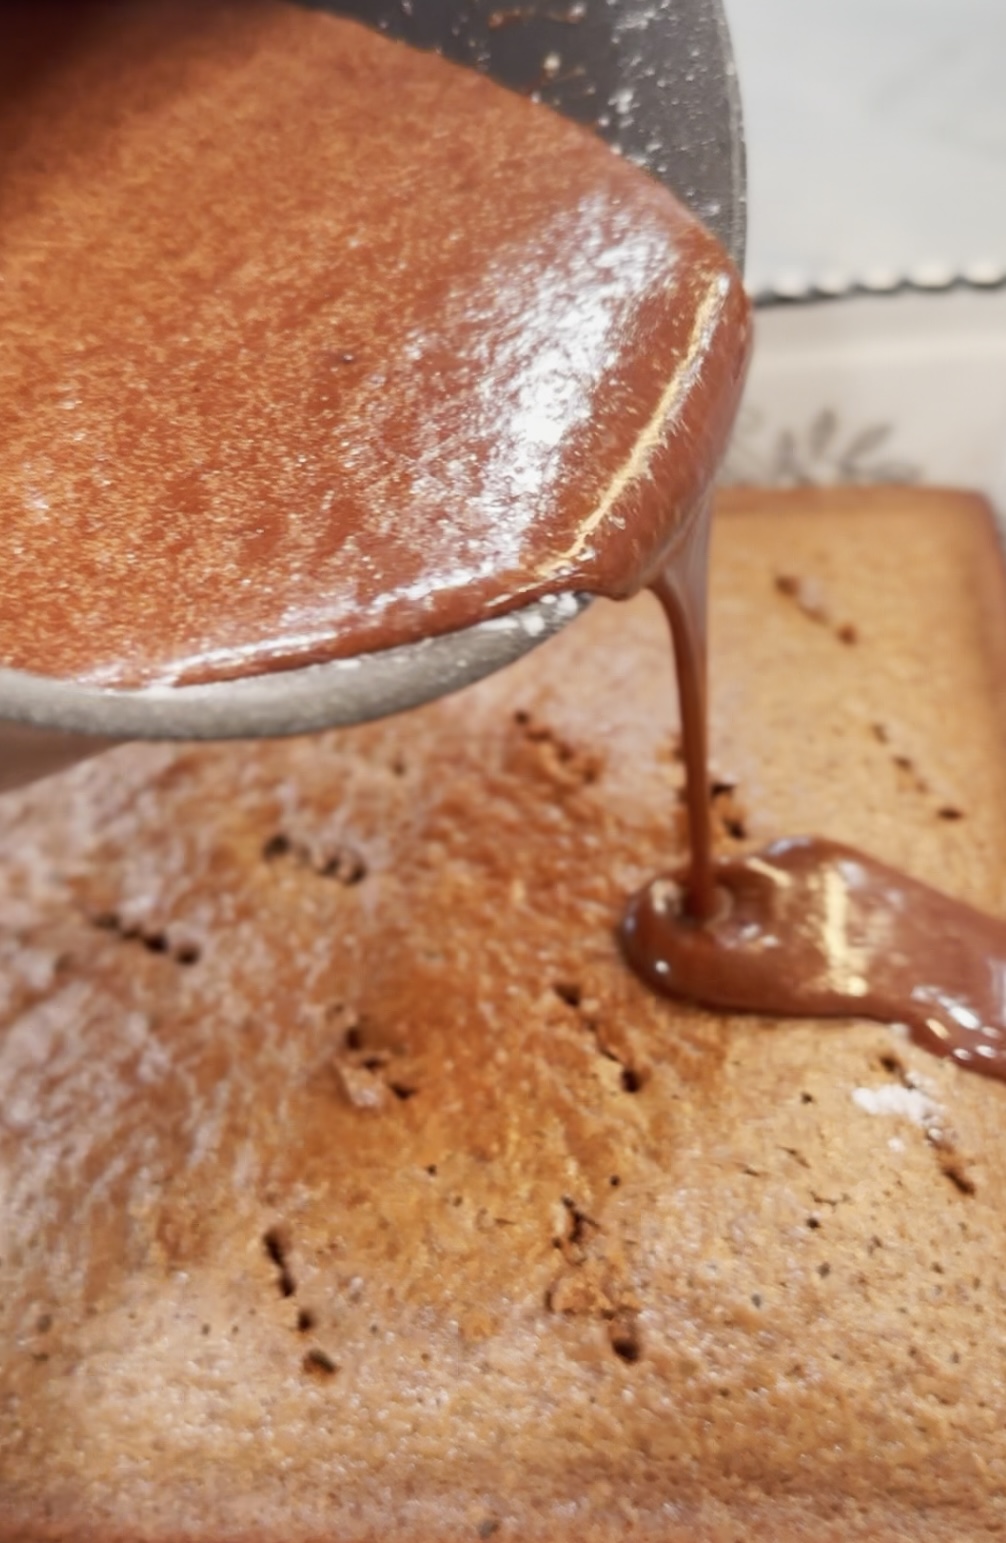 Drizzling warm, chocolate icing onto the hot cake.